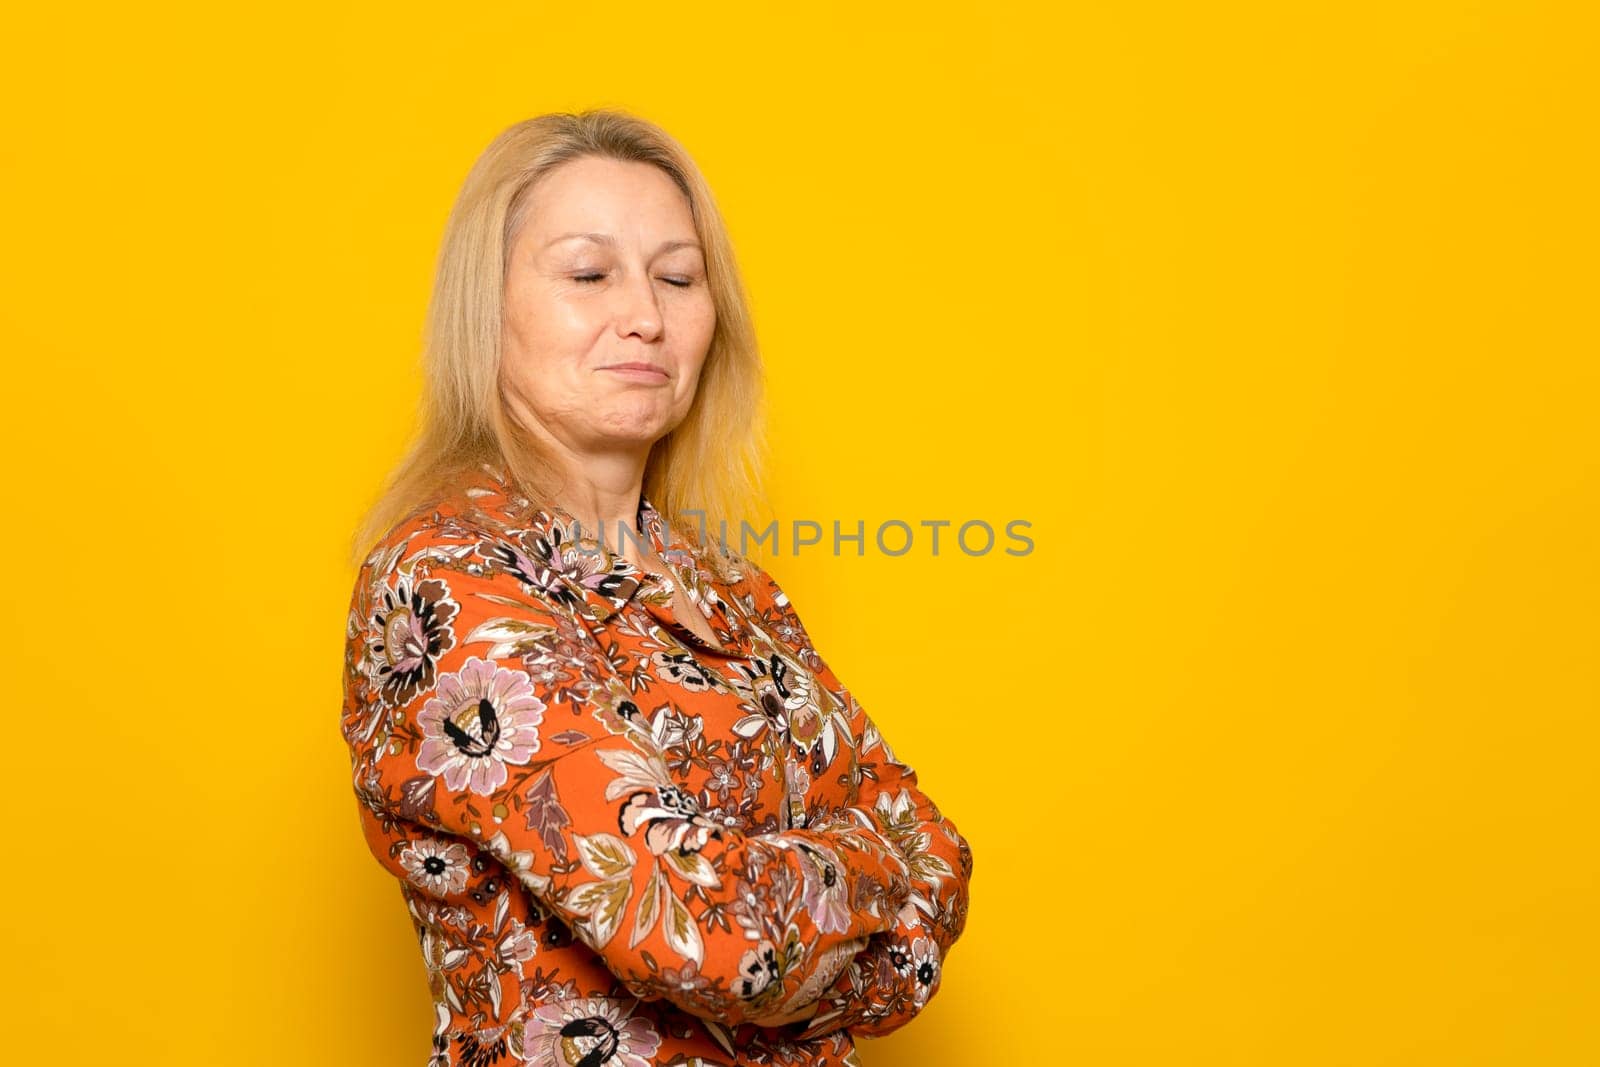 Caucasian blonde woman in her 40s wearing a patterned dress posing funny with her arms crossed and her eyes closed, isolated over yellow background